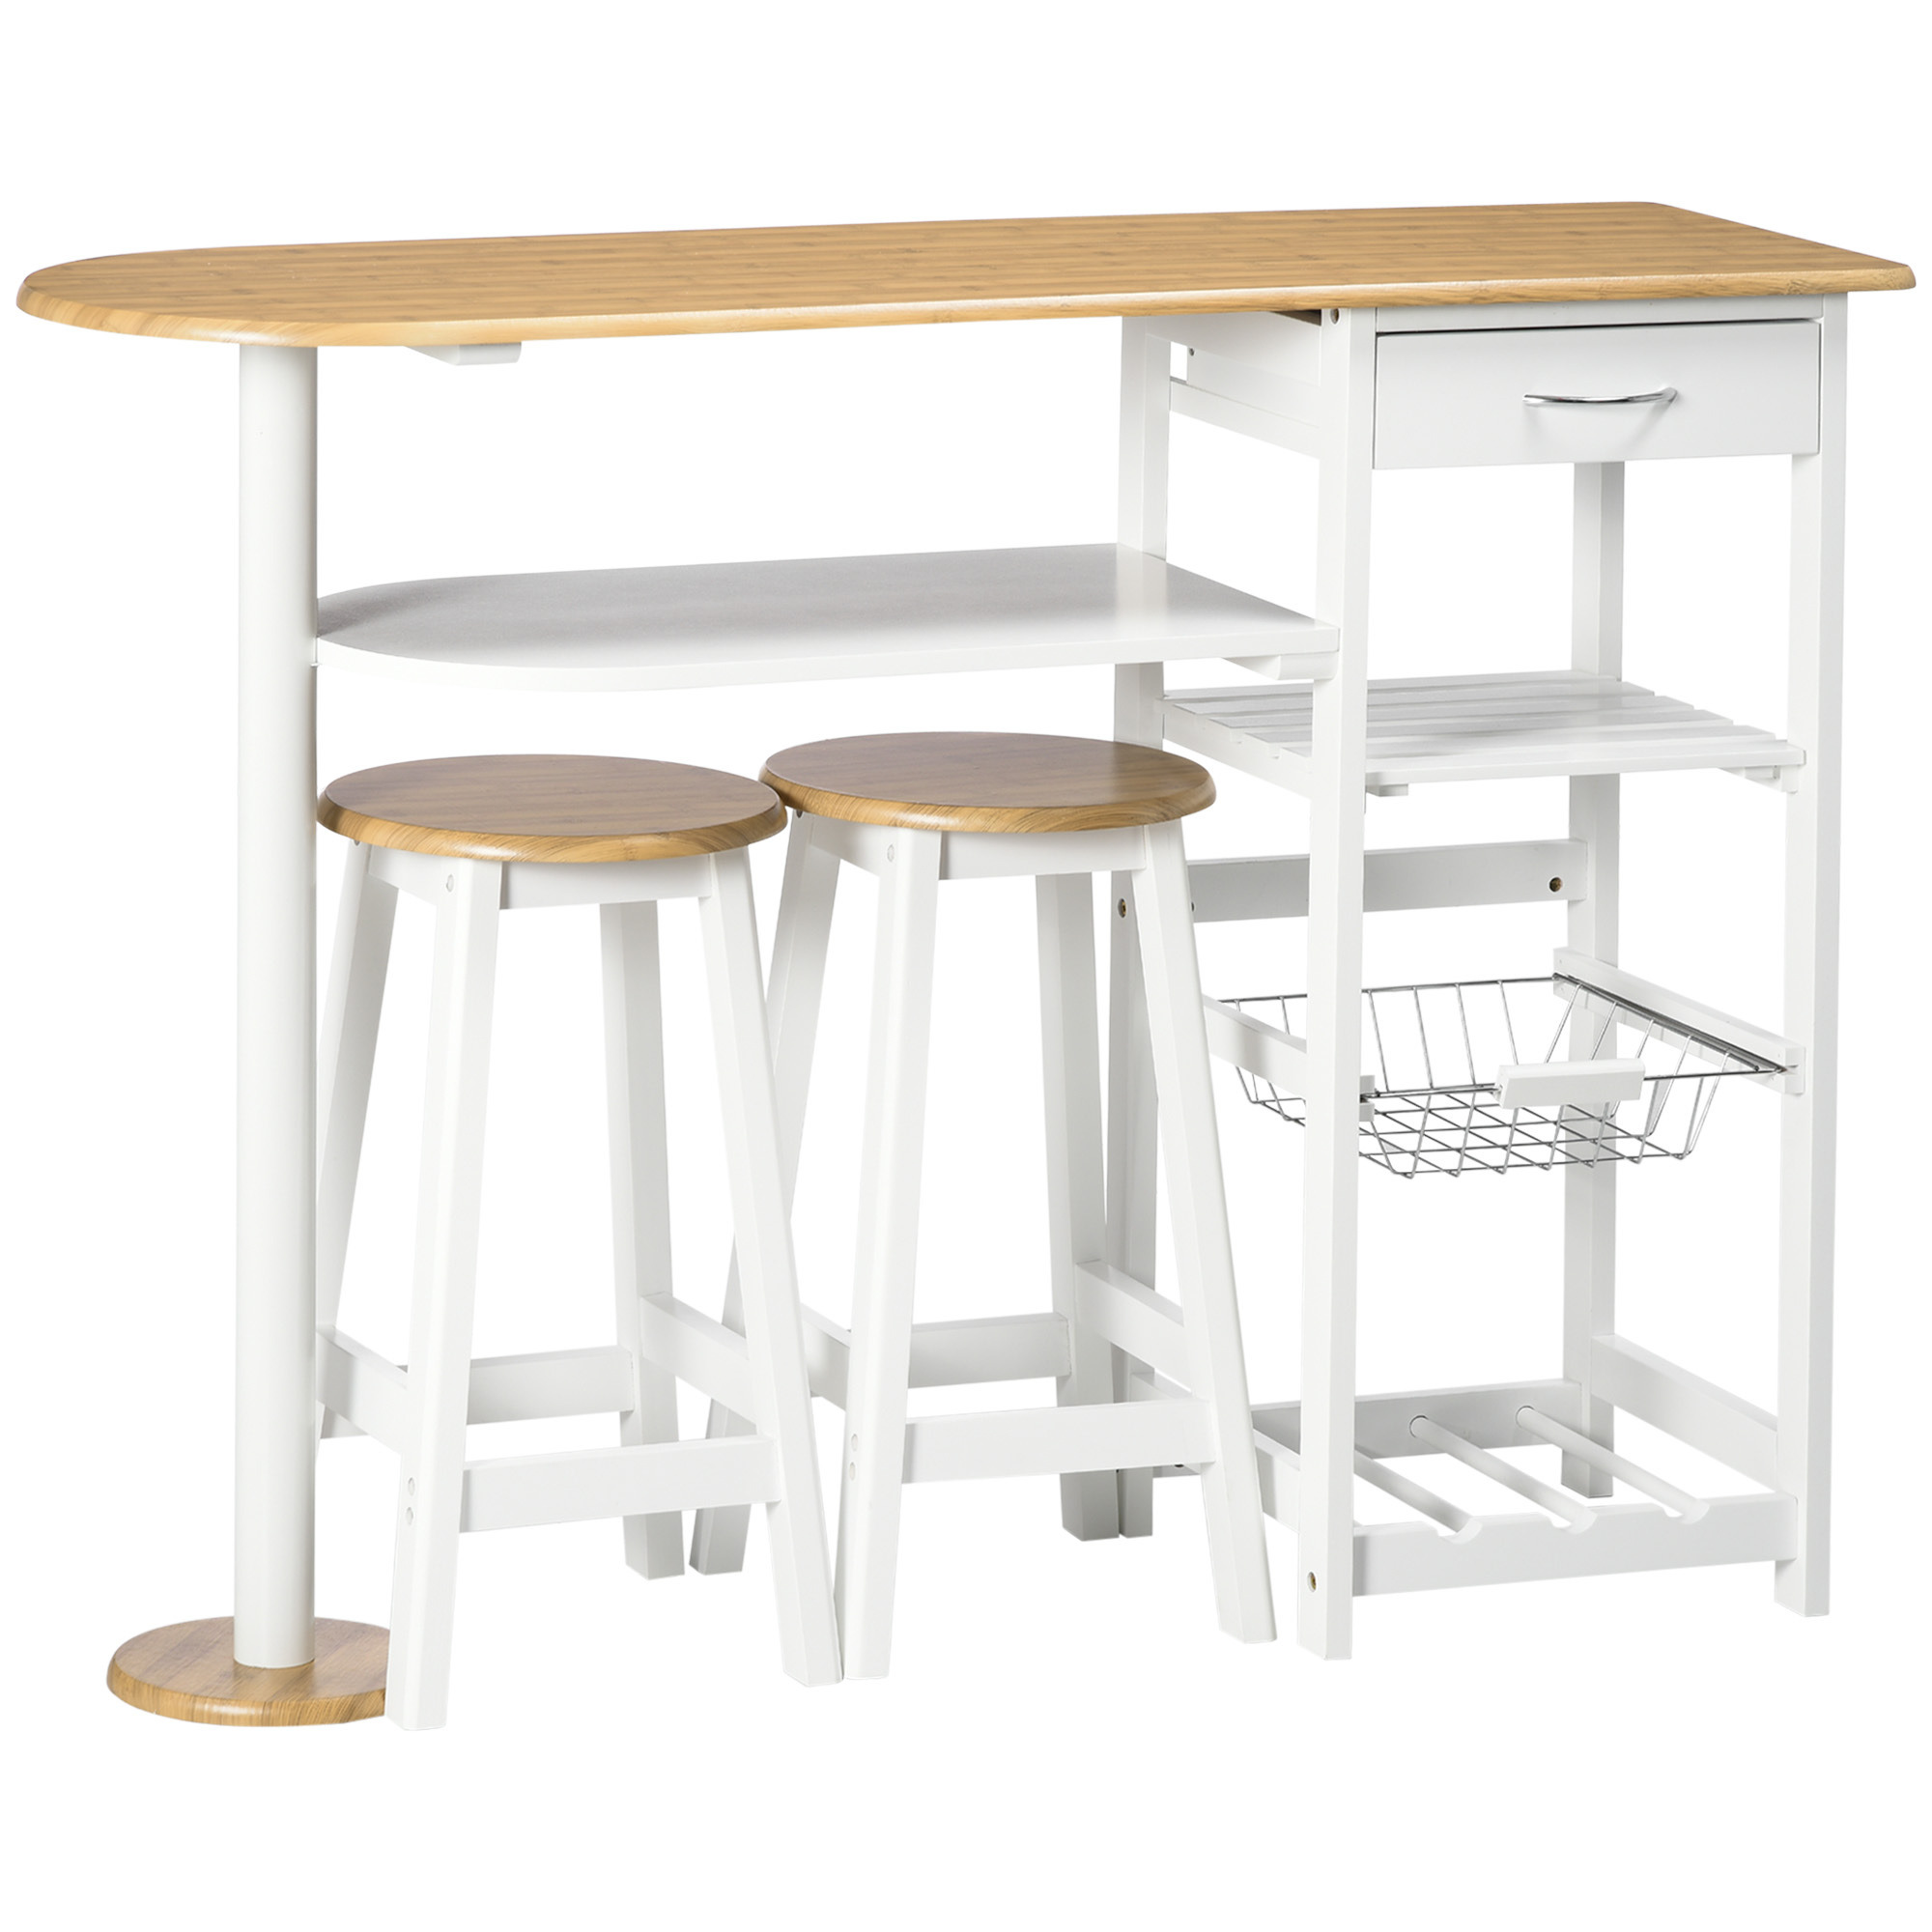 HOMCOM 3 Piece Bar Table Set, Breakfast Bar table and Stools with Storage Shelf, Drawer, Wire Basket and Wine Rack for Kitchen, Natural and White